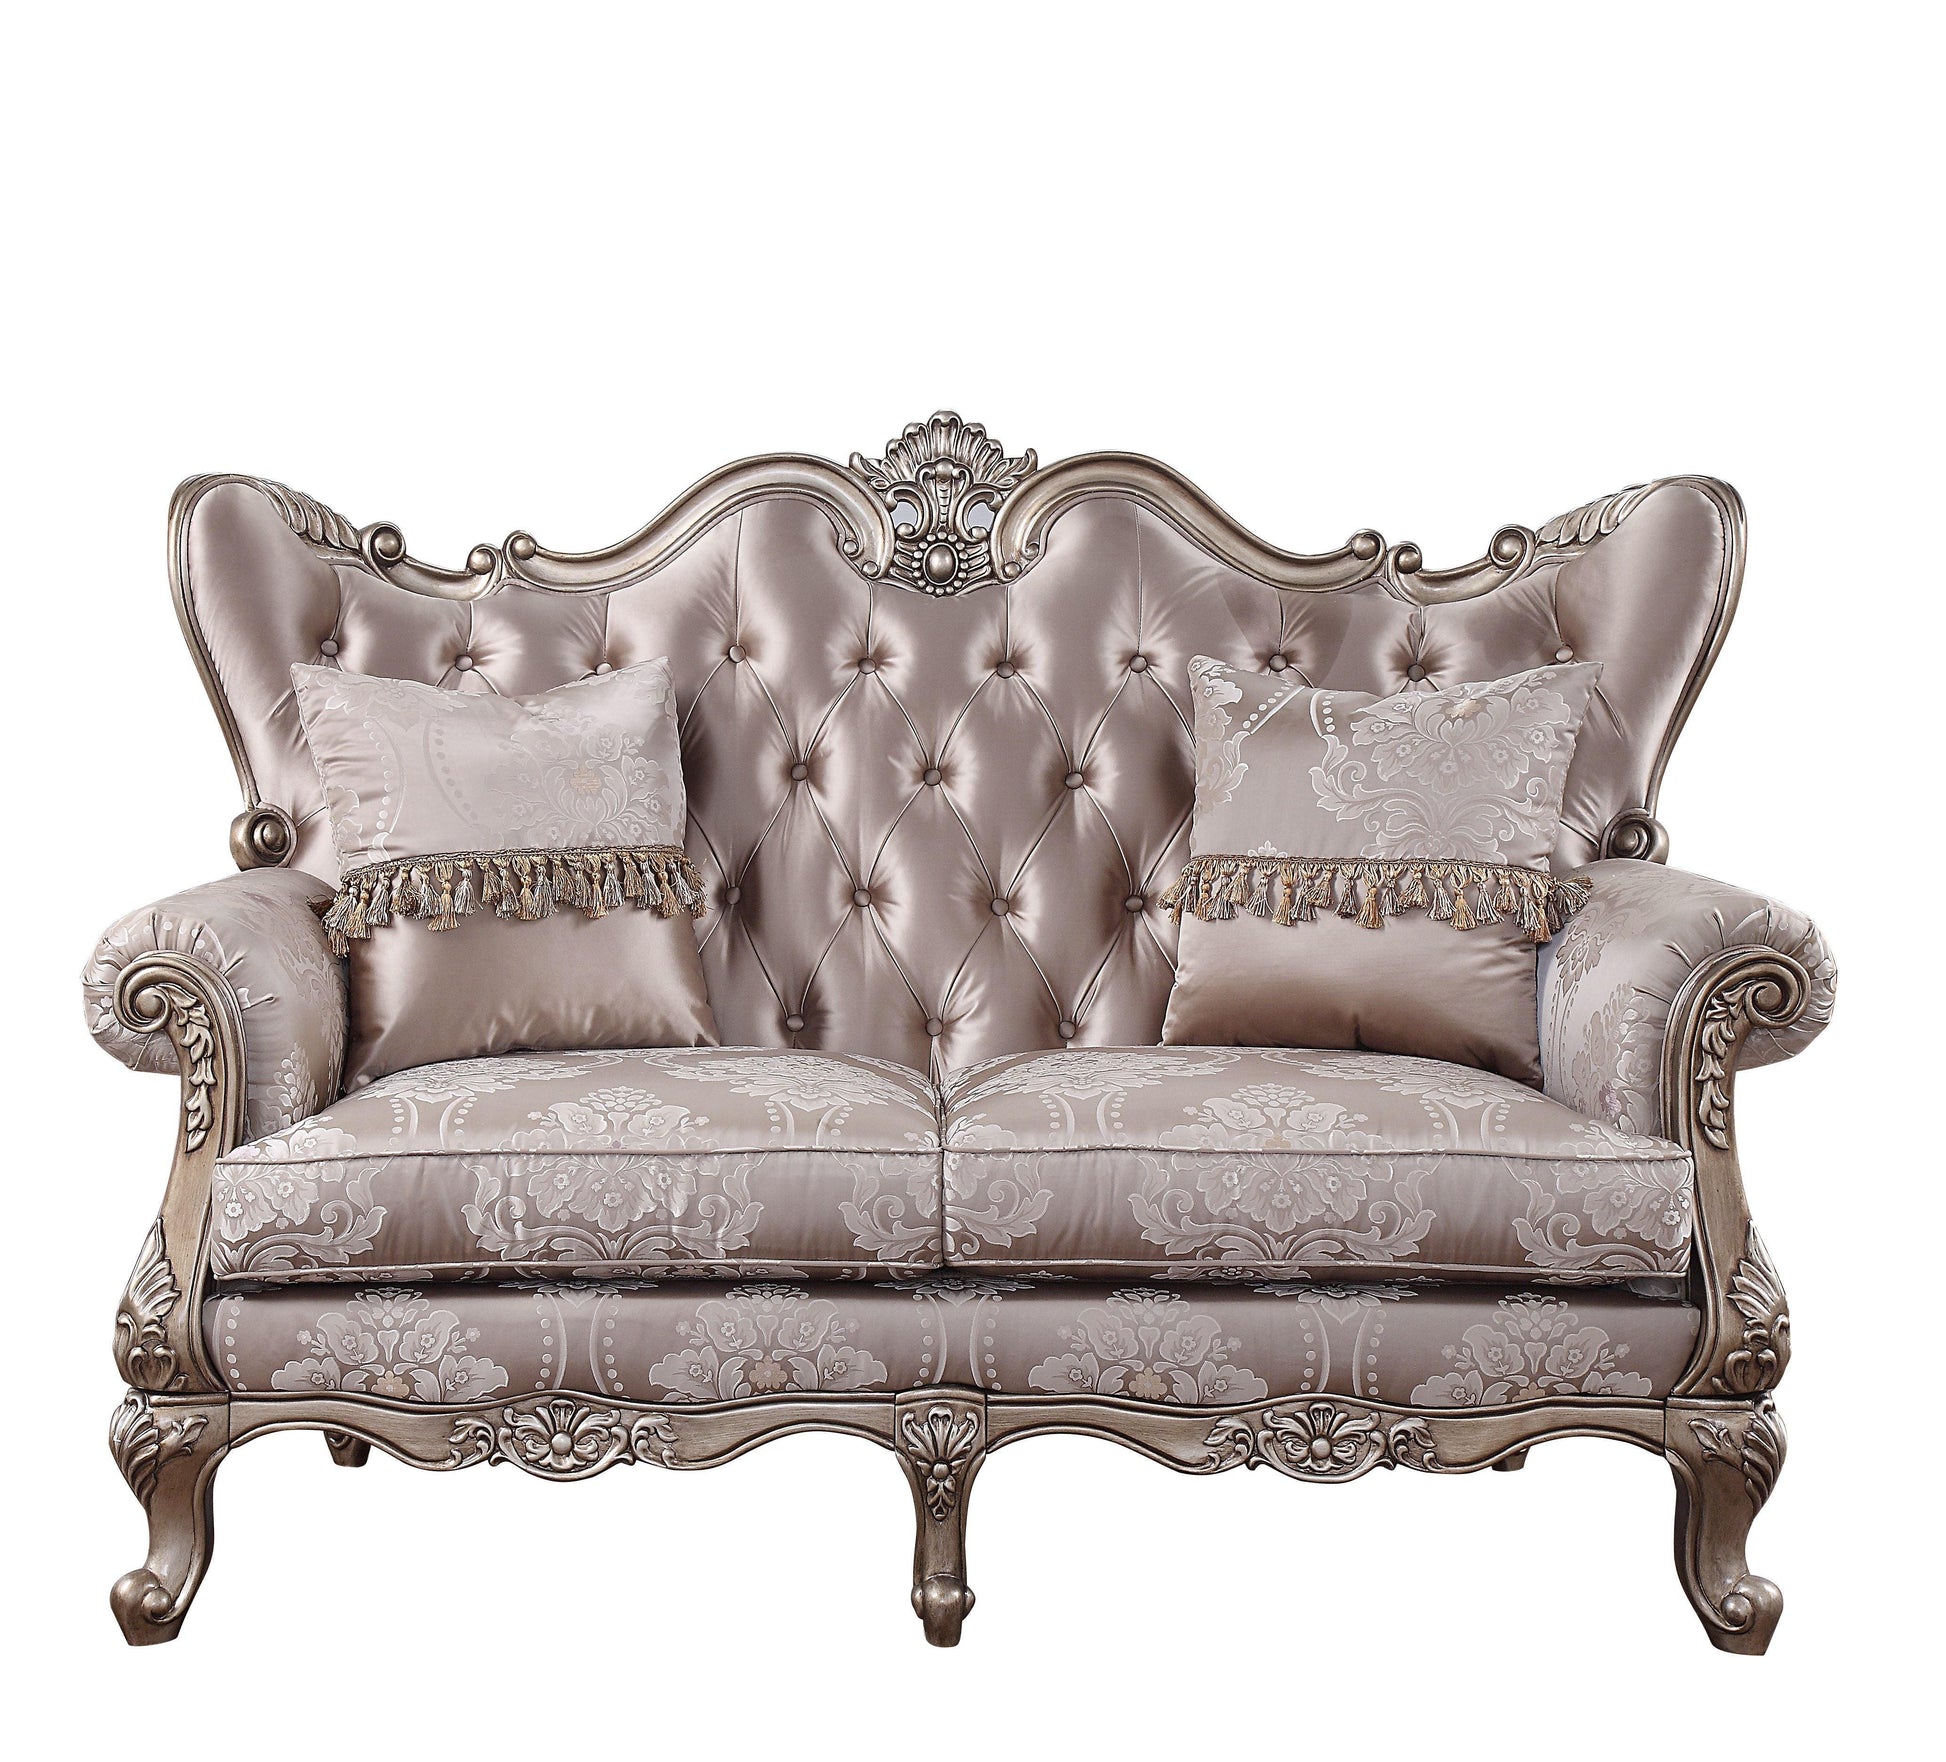 ACME Jayceon Loveseat w/2 Pillows, Fabric & Champagne FredCo